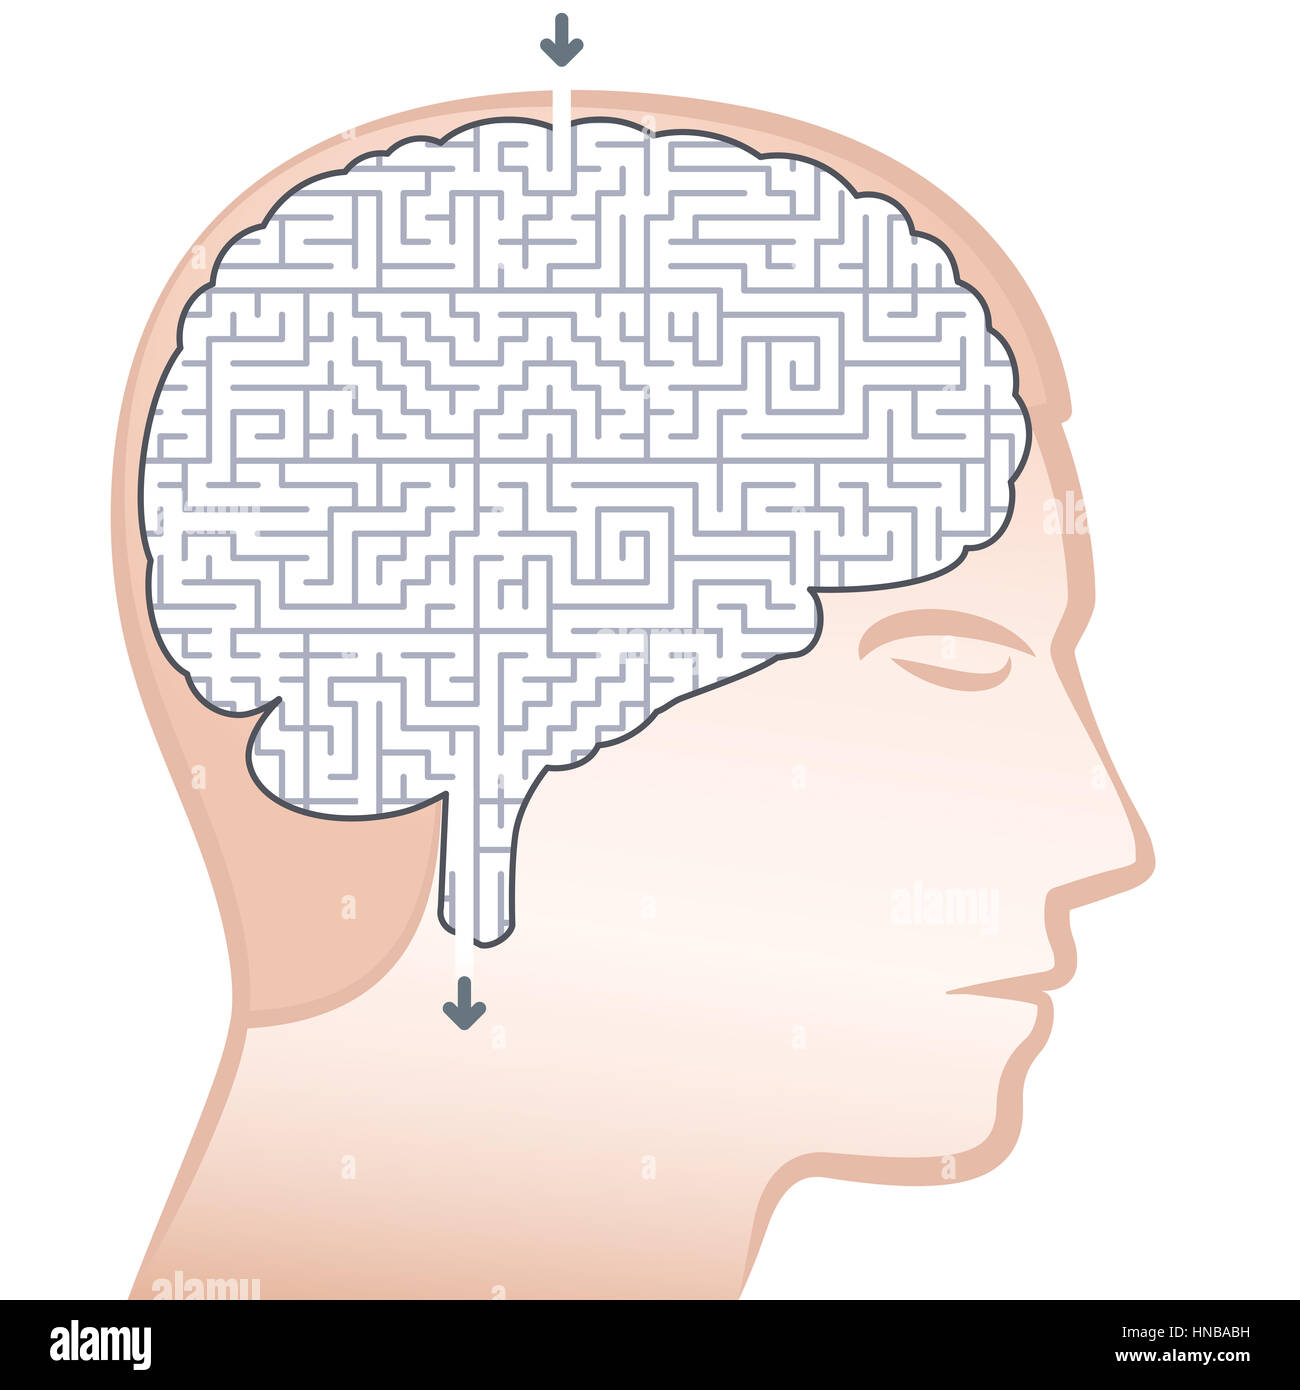 Brain maze - symbol for complex or complicated thinking. Stock Photo